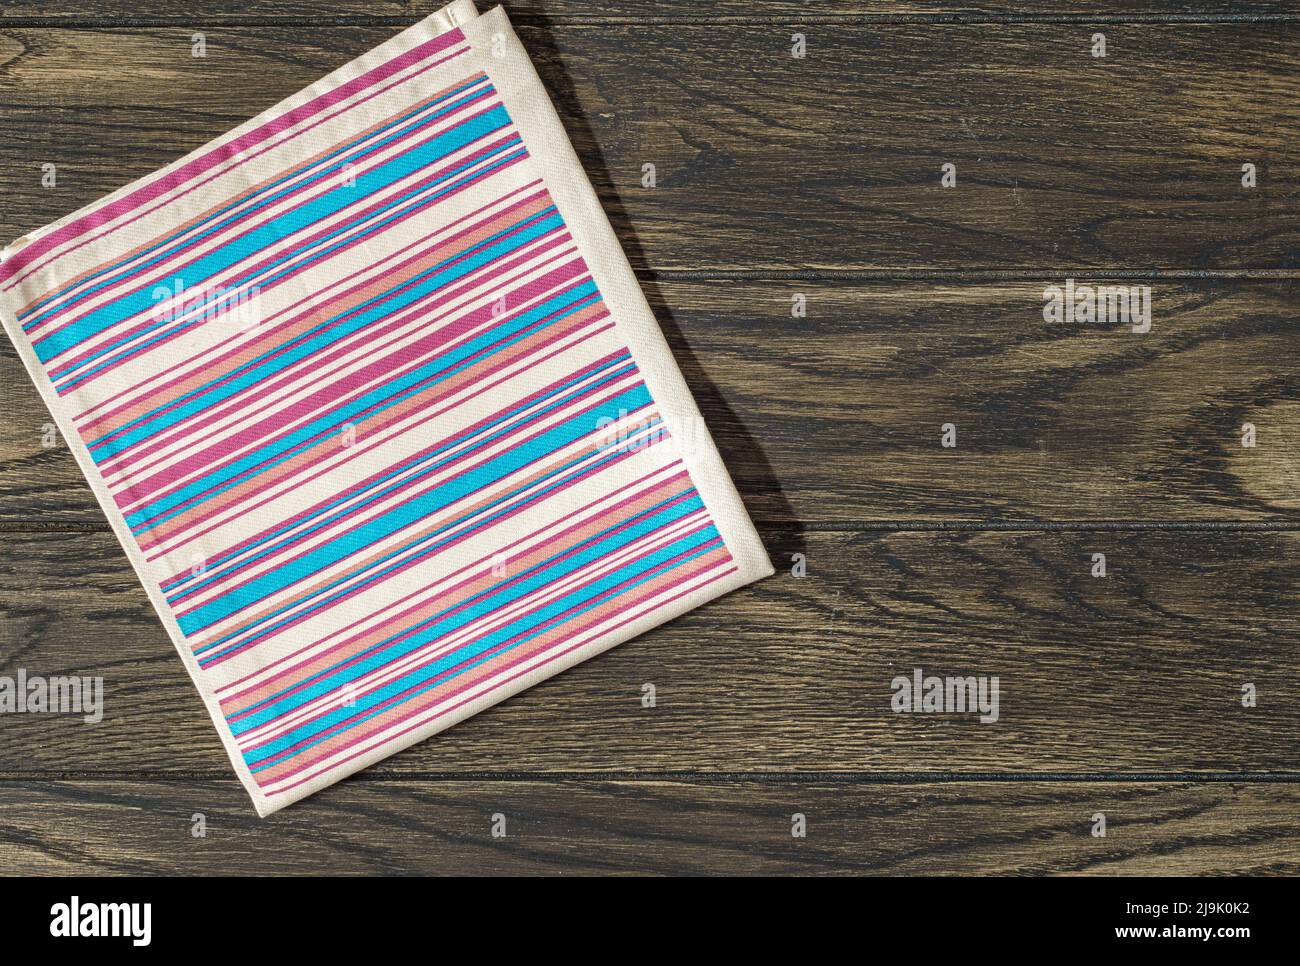 Striped napkin from left side of wooden table top view. Food background Stock Photo